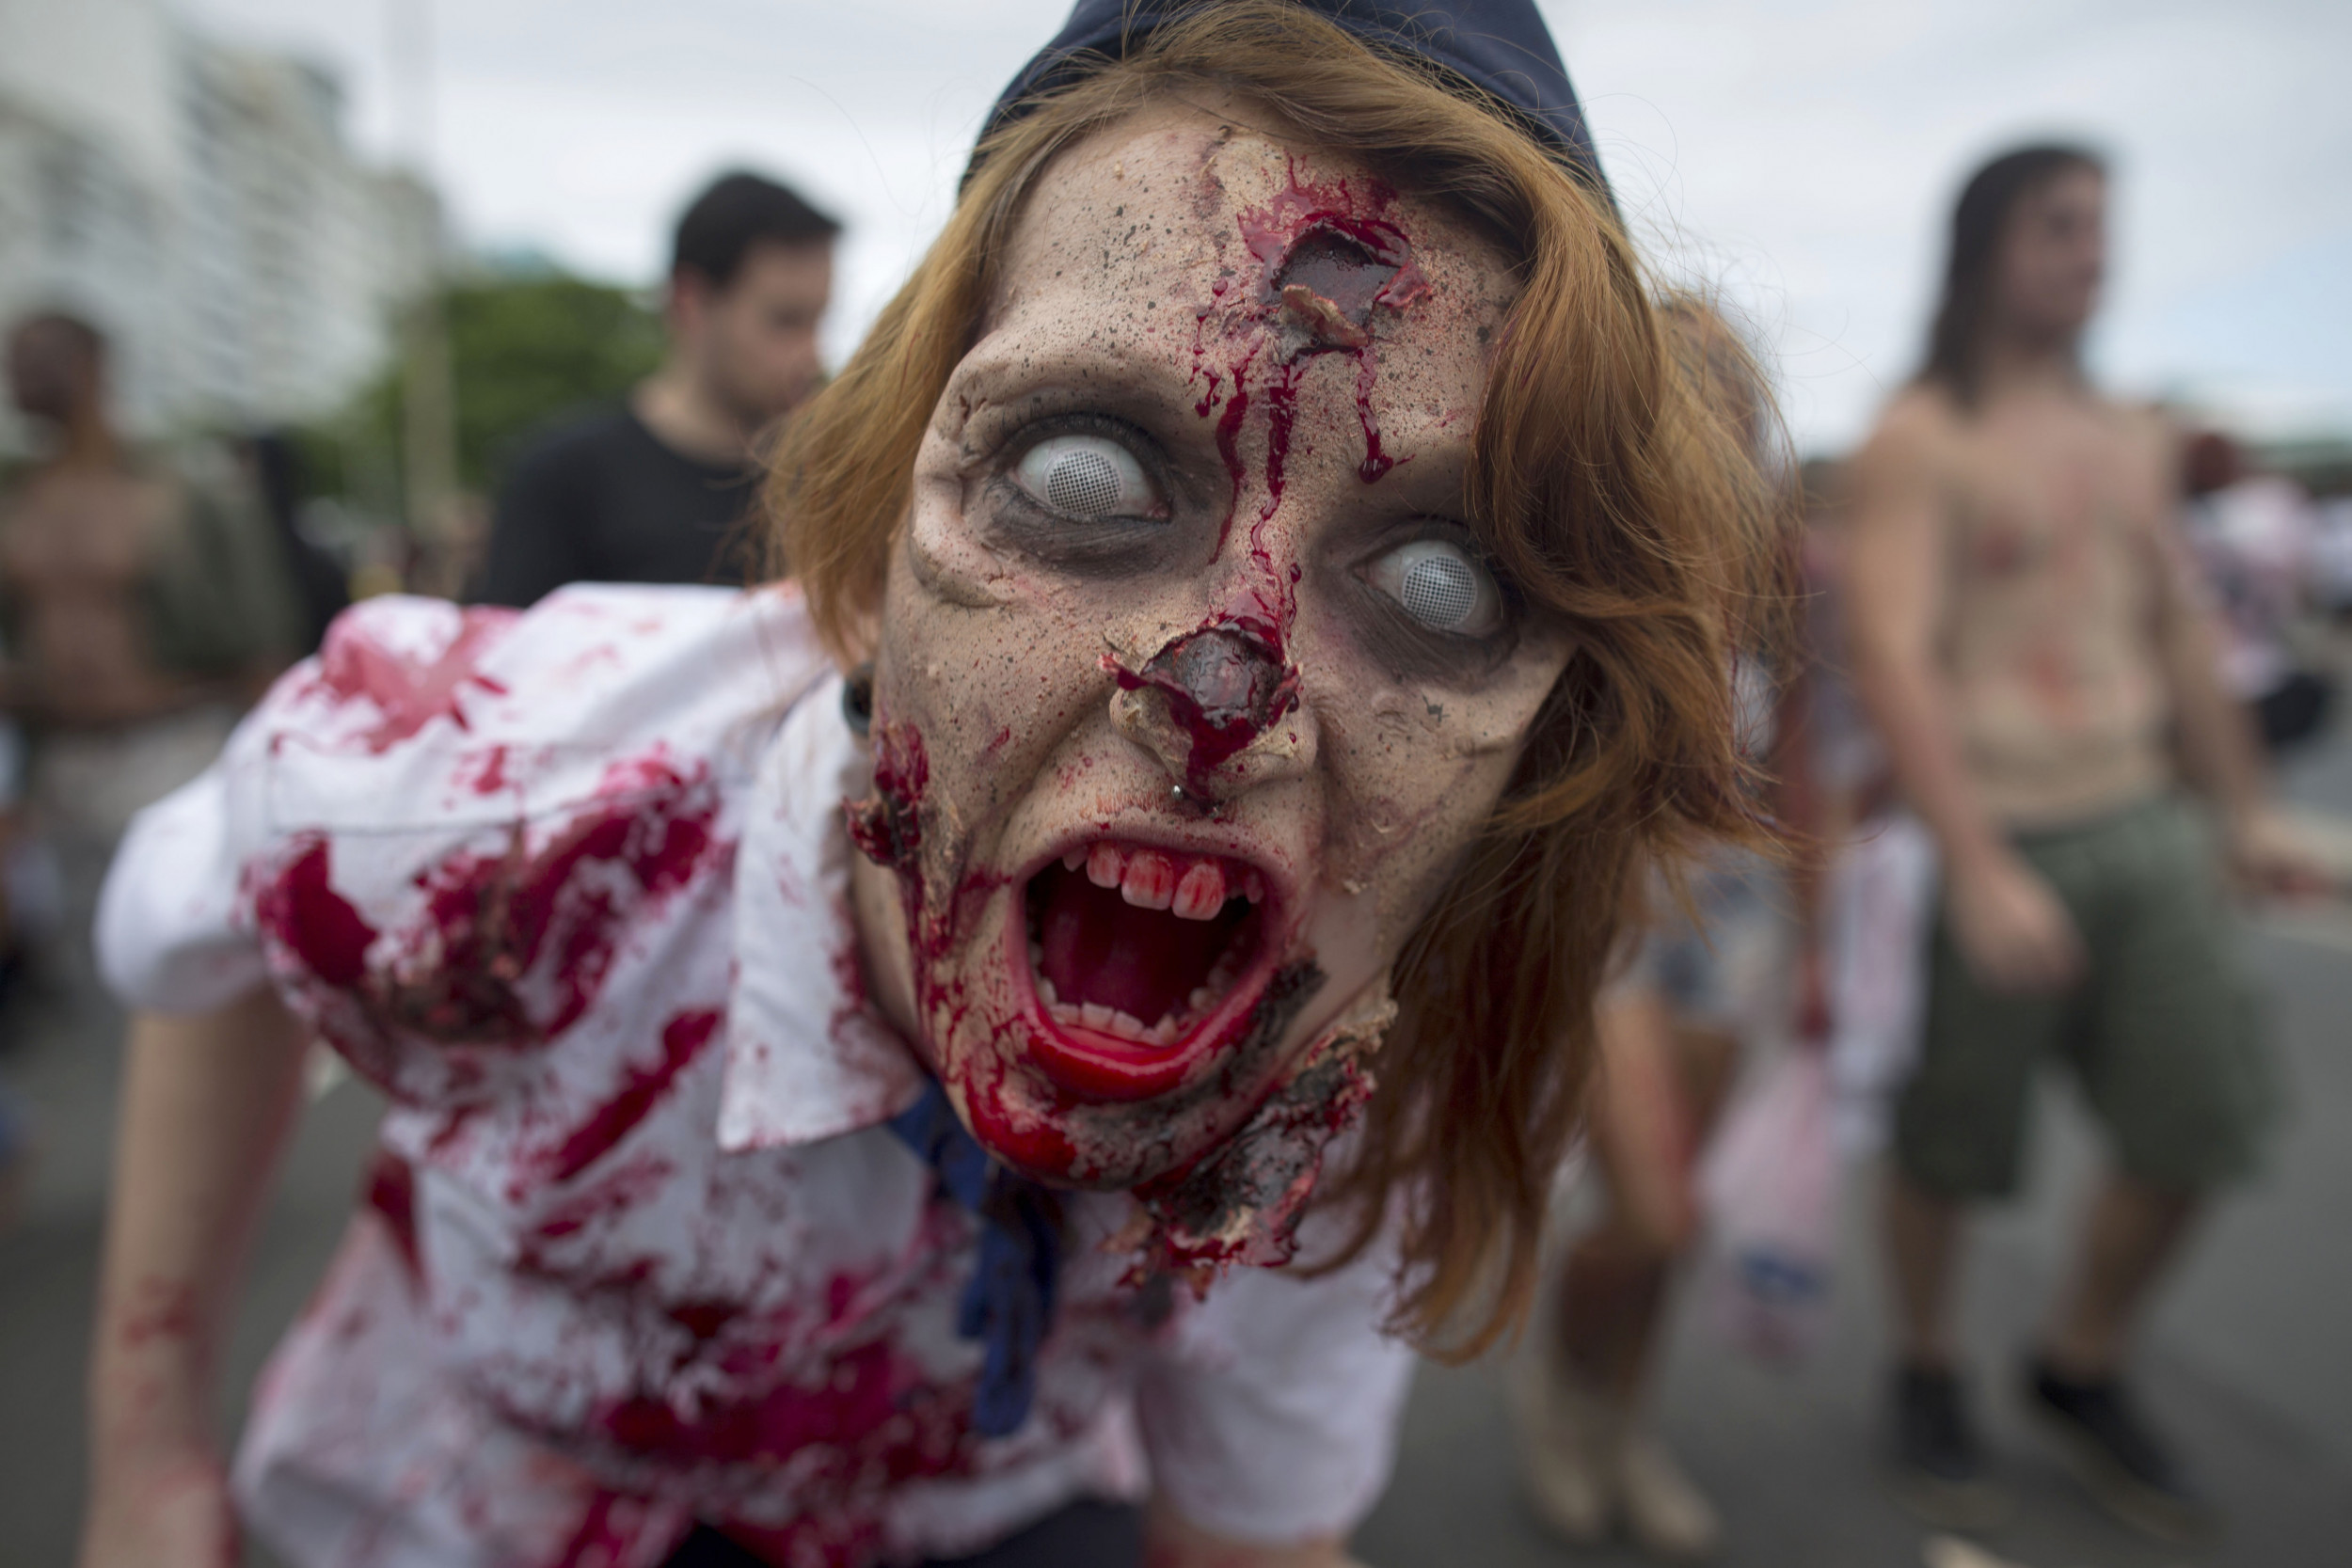 The story behind vampires, zombies and other monsters that haunt